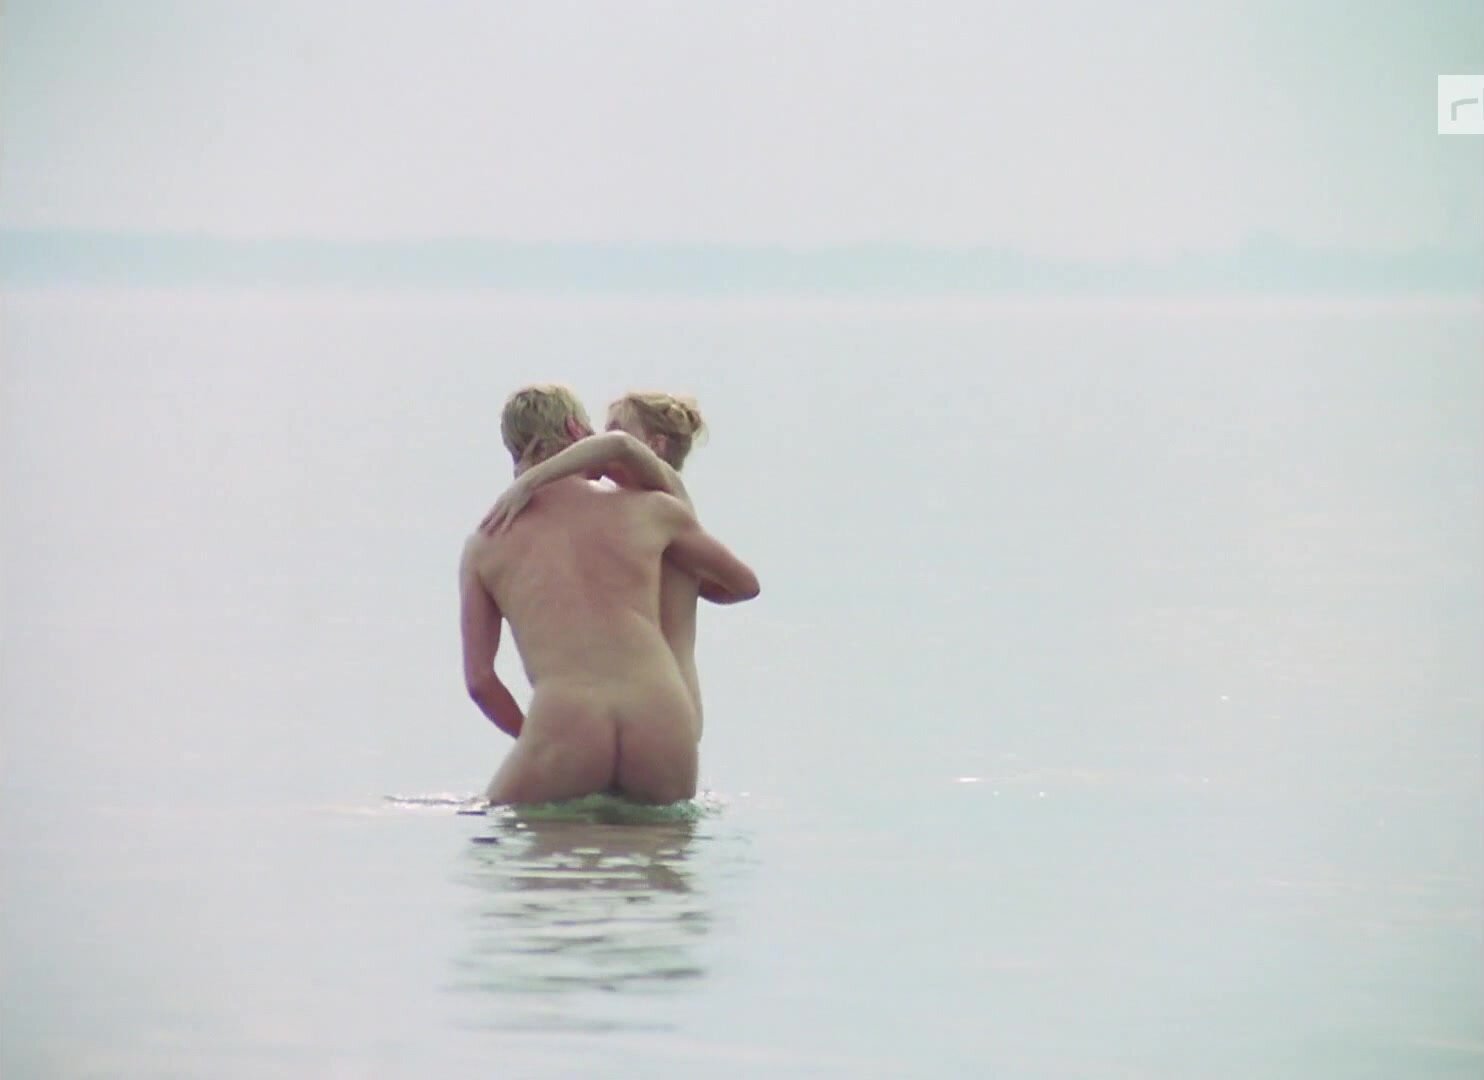 BLOND GERMAN CARRIES A WOMAN FROM THE SEA